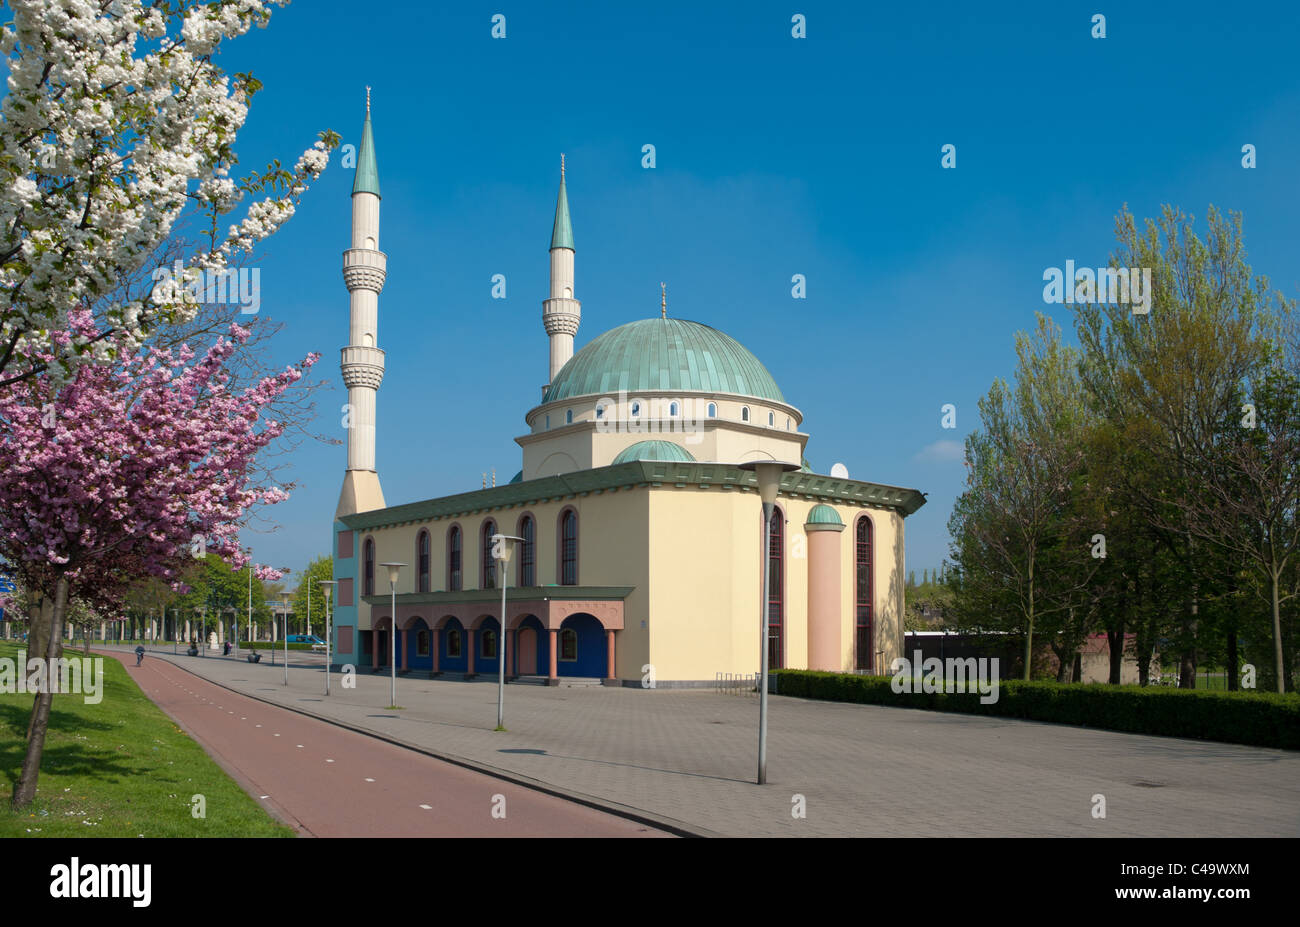 mevlana mosque in Rotterdam, located in Spangen, a district with over 80 percent immigrants Stock Photo